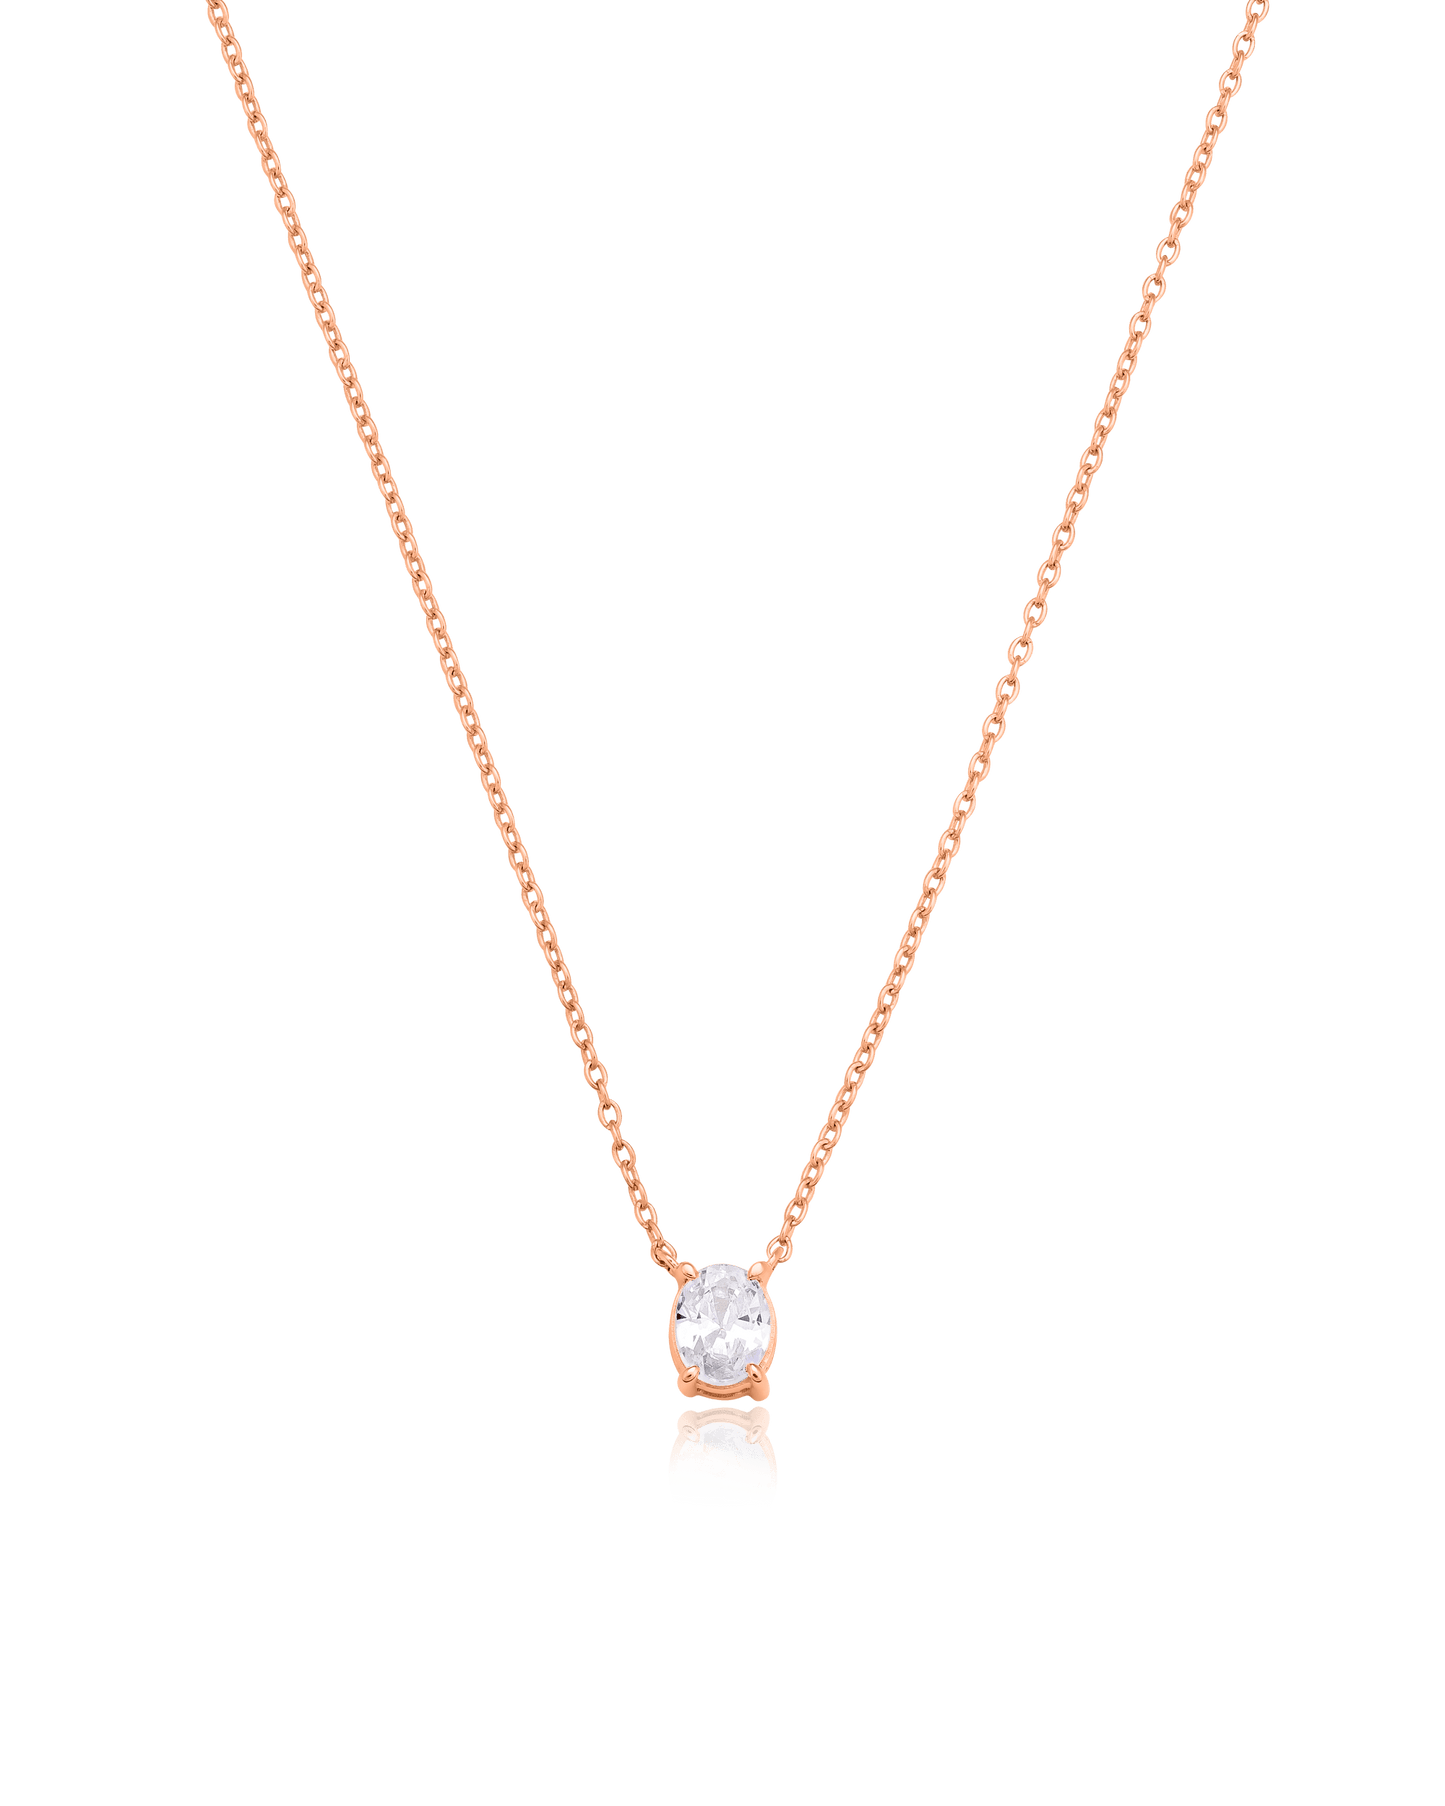 Oval Solitaire Diamond Necklace - 925 Sterling Silver Necklaces magal-dev 